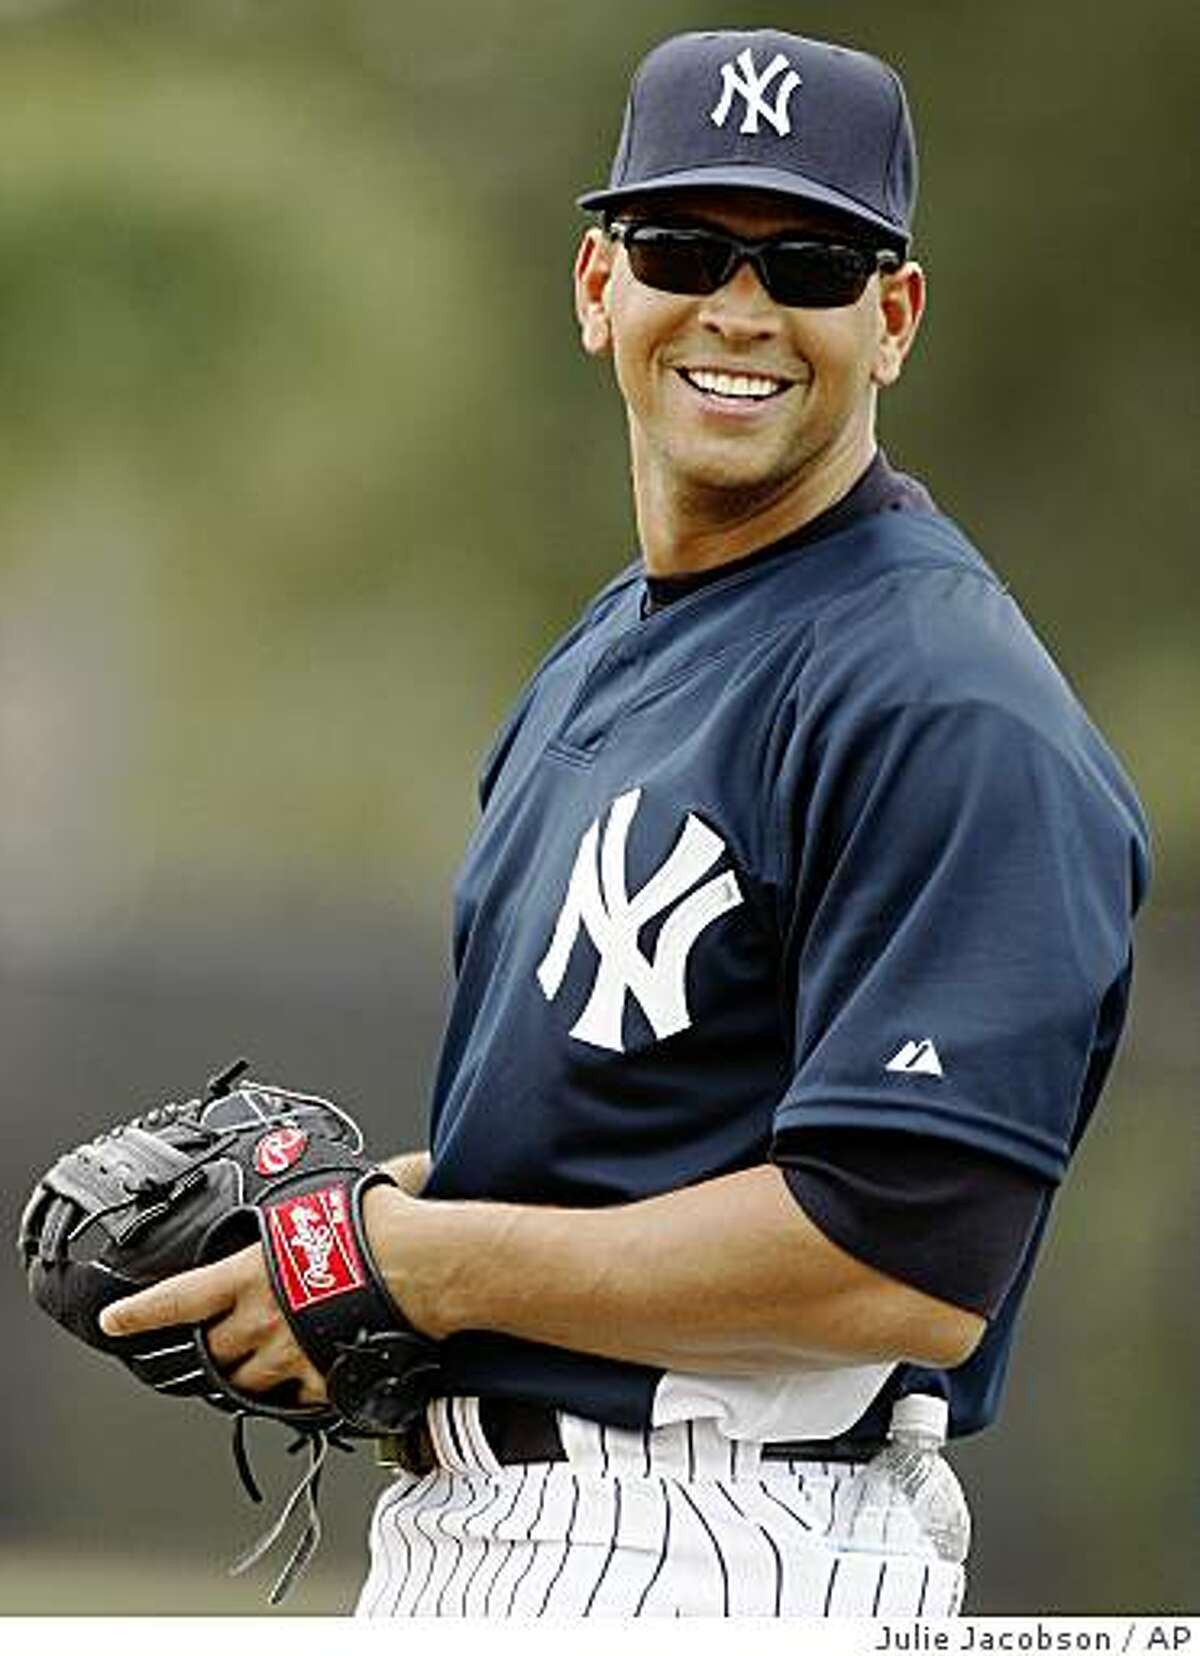 ** FILE ** In this Feb. 20, 2008 file photo, New York Yankees third baseman Alex Rodriguez glances back at fans while warming up during spring training baseball workouts in Tampa, Fla. How A-Rod responds to a report that he tested positive for steroids in 2003 will likely frame his pursuit of the career home run record and could define his playing days in the view of fans and Hall of Fame voters. (AP Photo/Julie Jacobson, File)